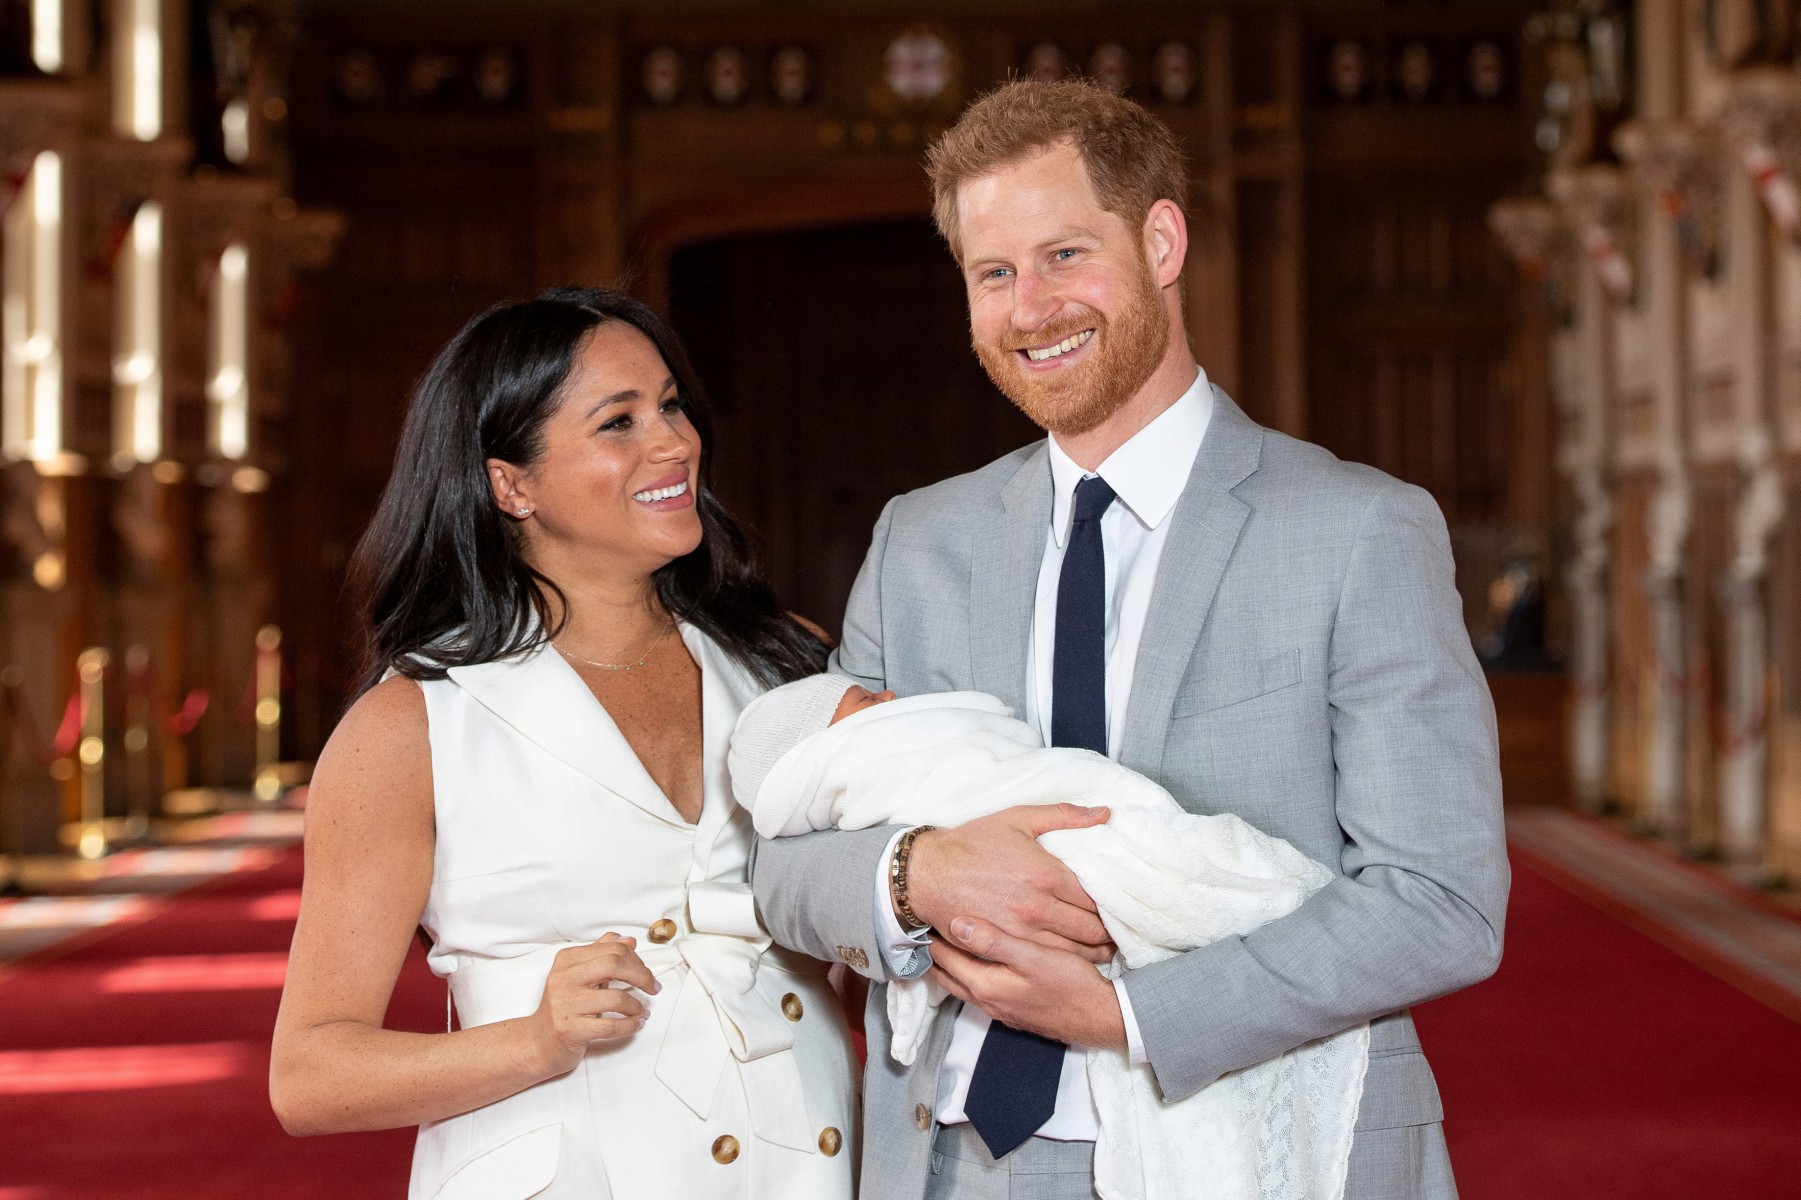 Meghan remained in Canada with baby Archie during the crunch talks